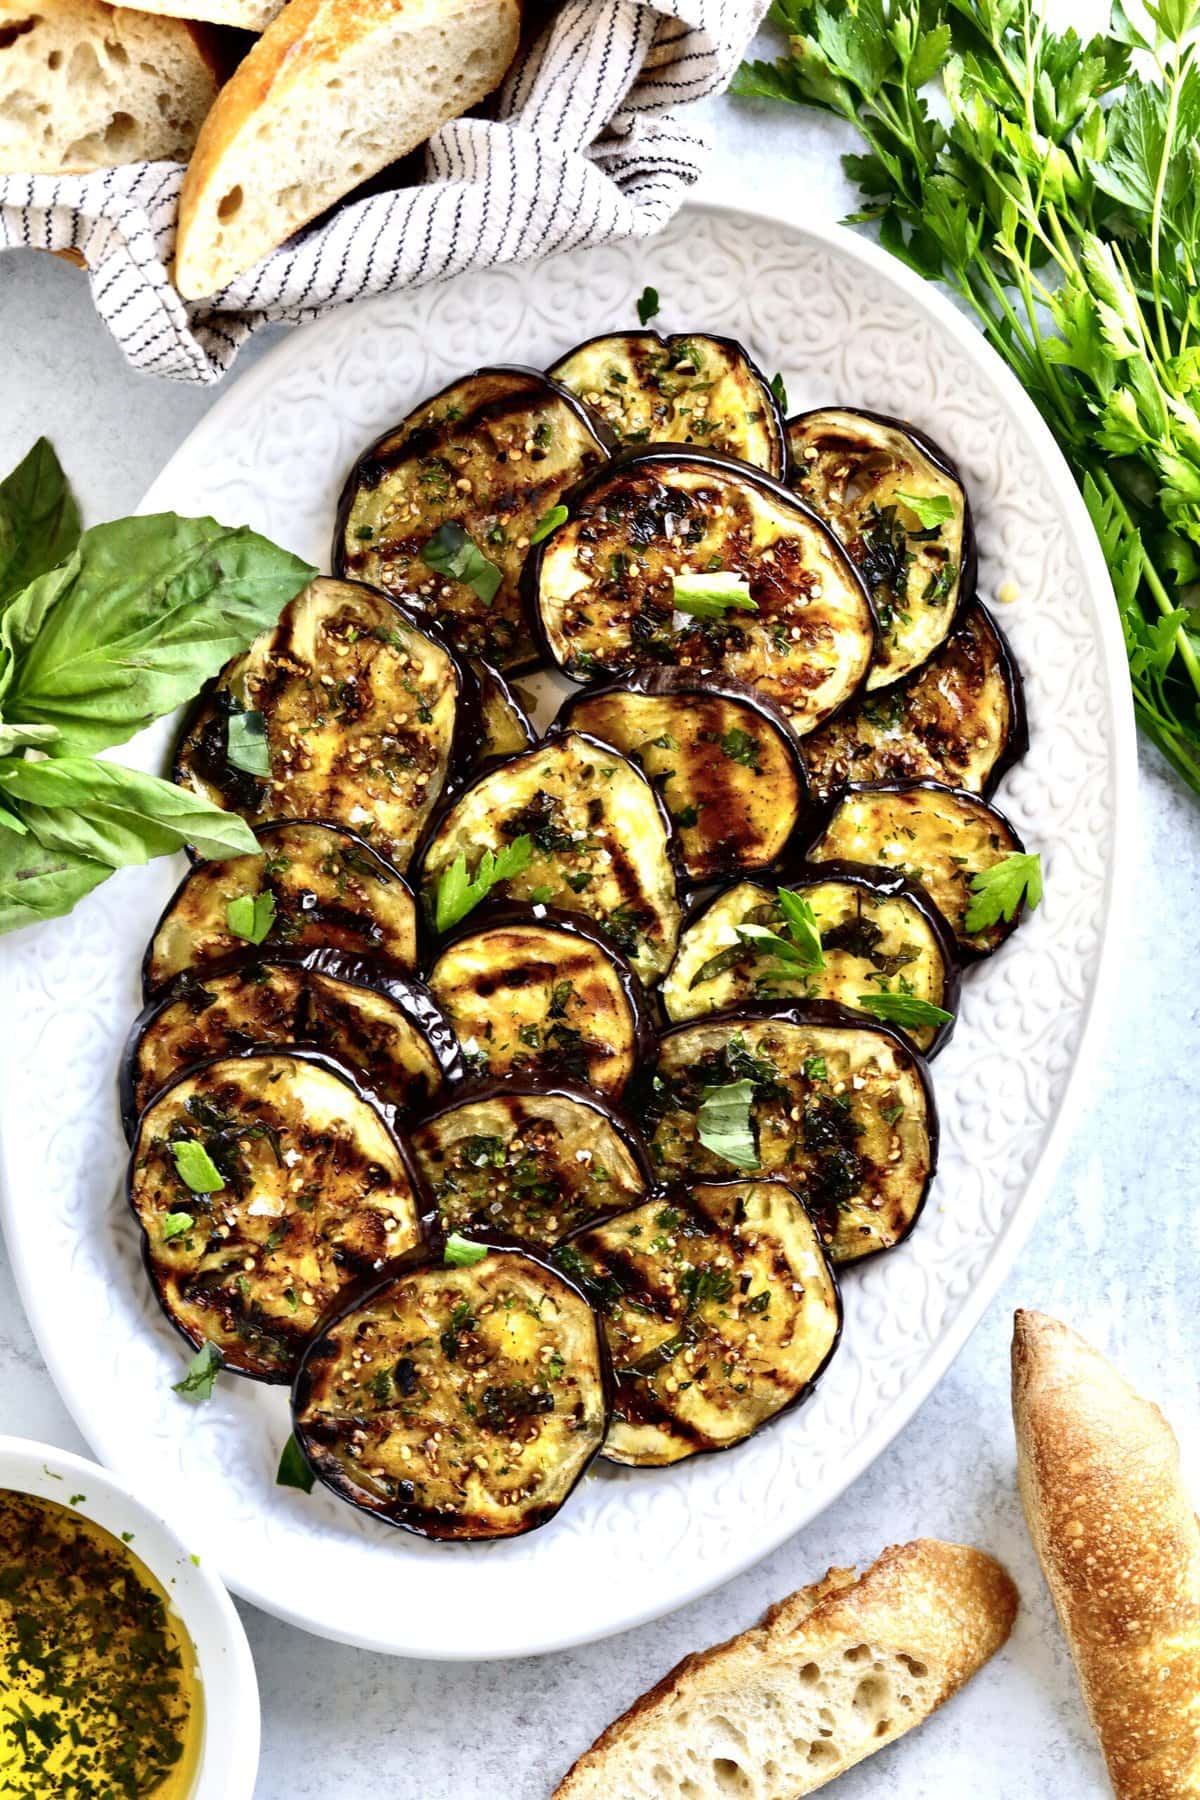 Easy Italian Grilled Eggplant Recipe (Melanzane grigliate) on a serving platter with bread slices around it and parsley and basil.